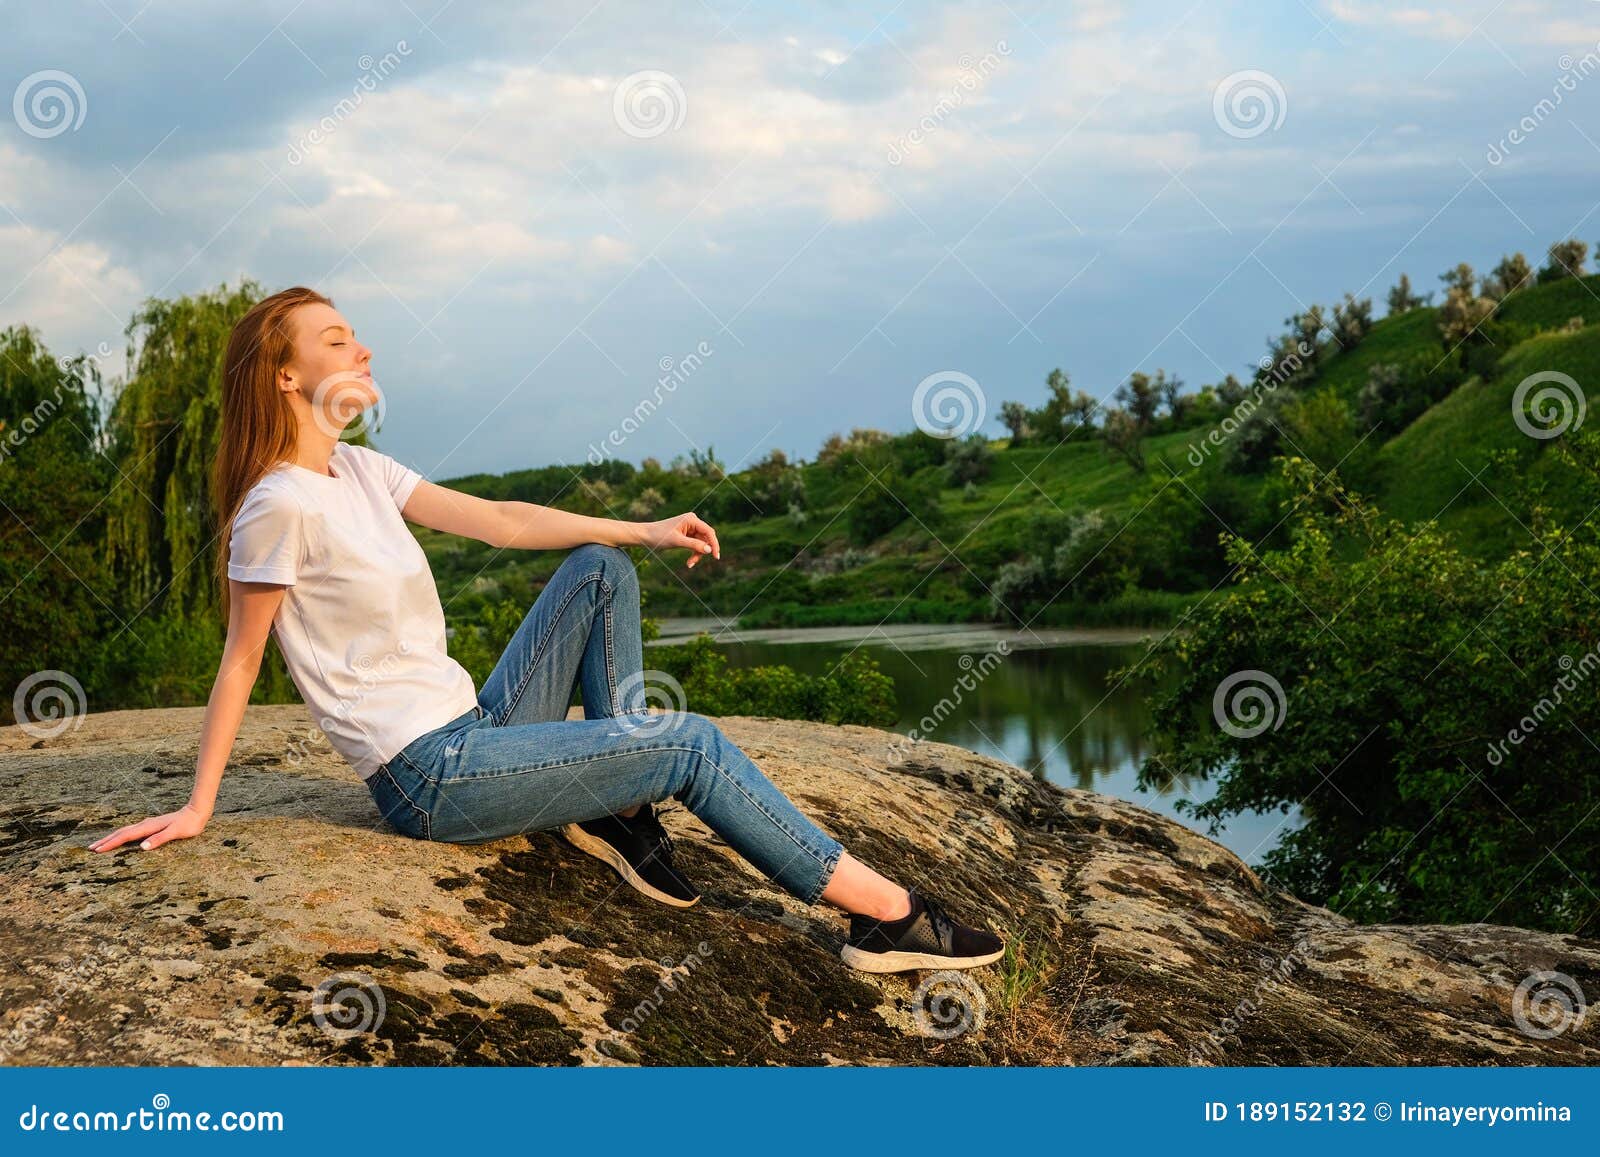 relaxation, meditation mental health concept. national relaxation day. red-haired woman meditates and relaxes in nature